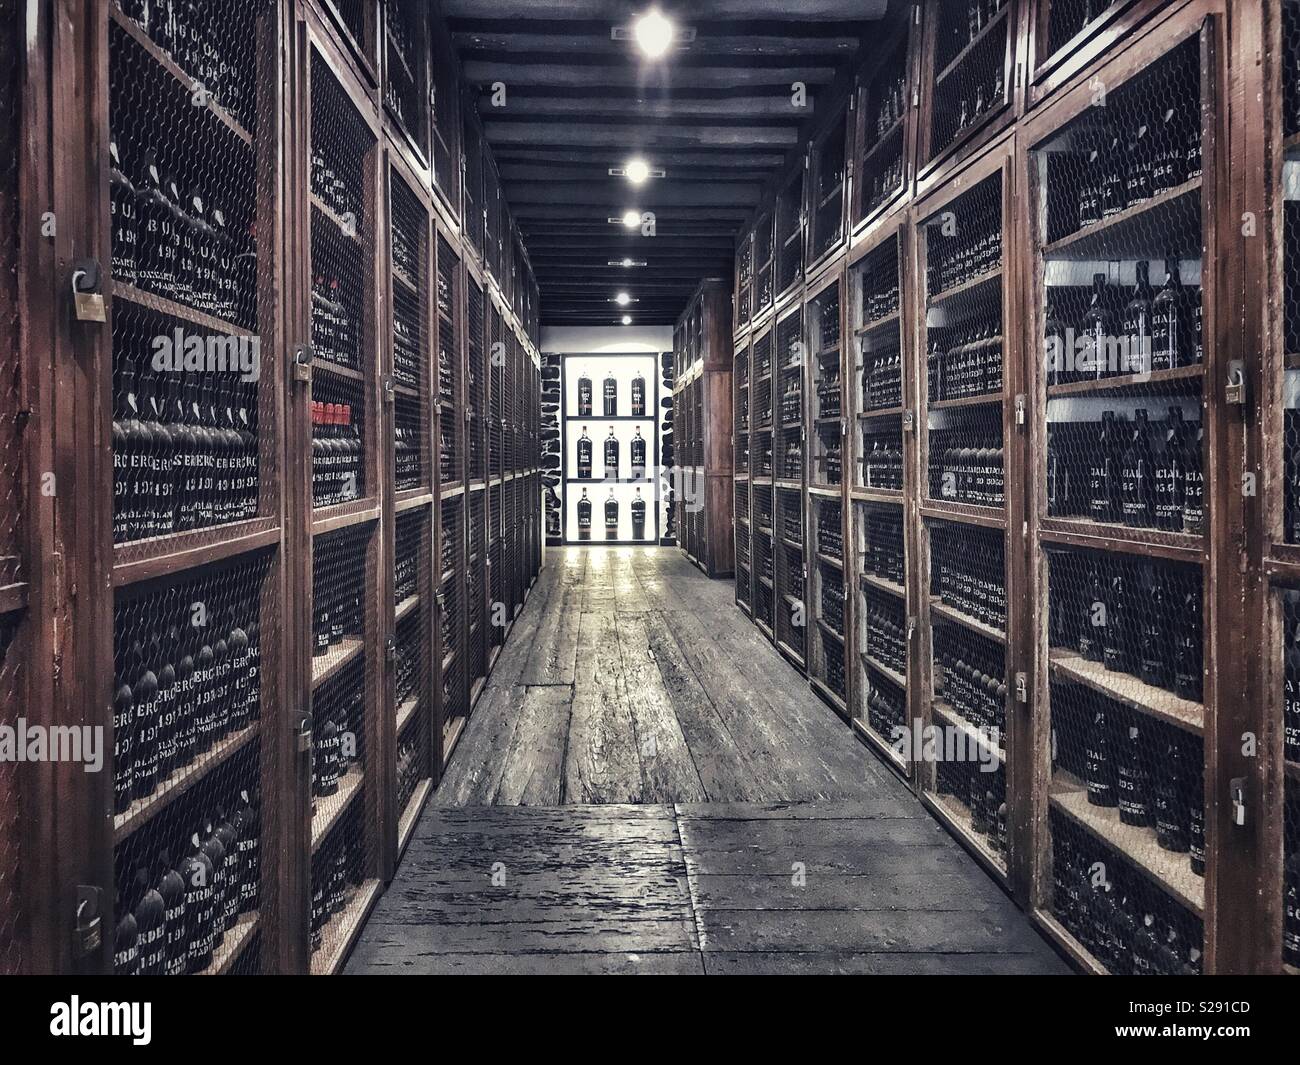 Bottles in the Frasqueria / Vintage Room, Blandy’s Wine Lodge, Funchal, Madeira Stock Photo